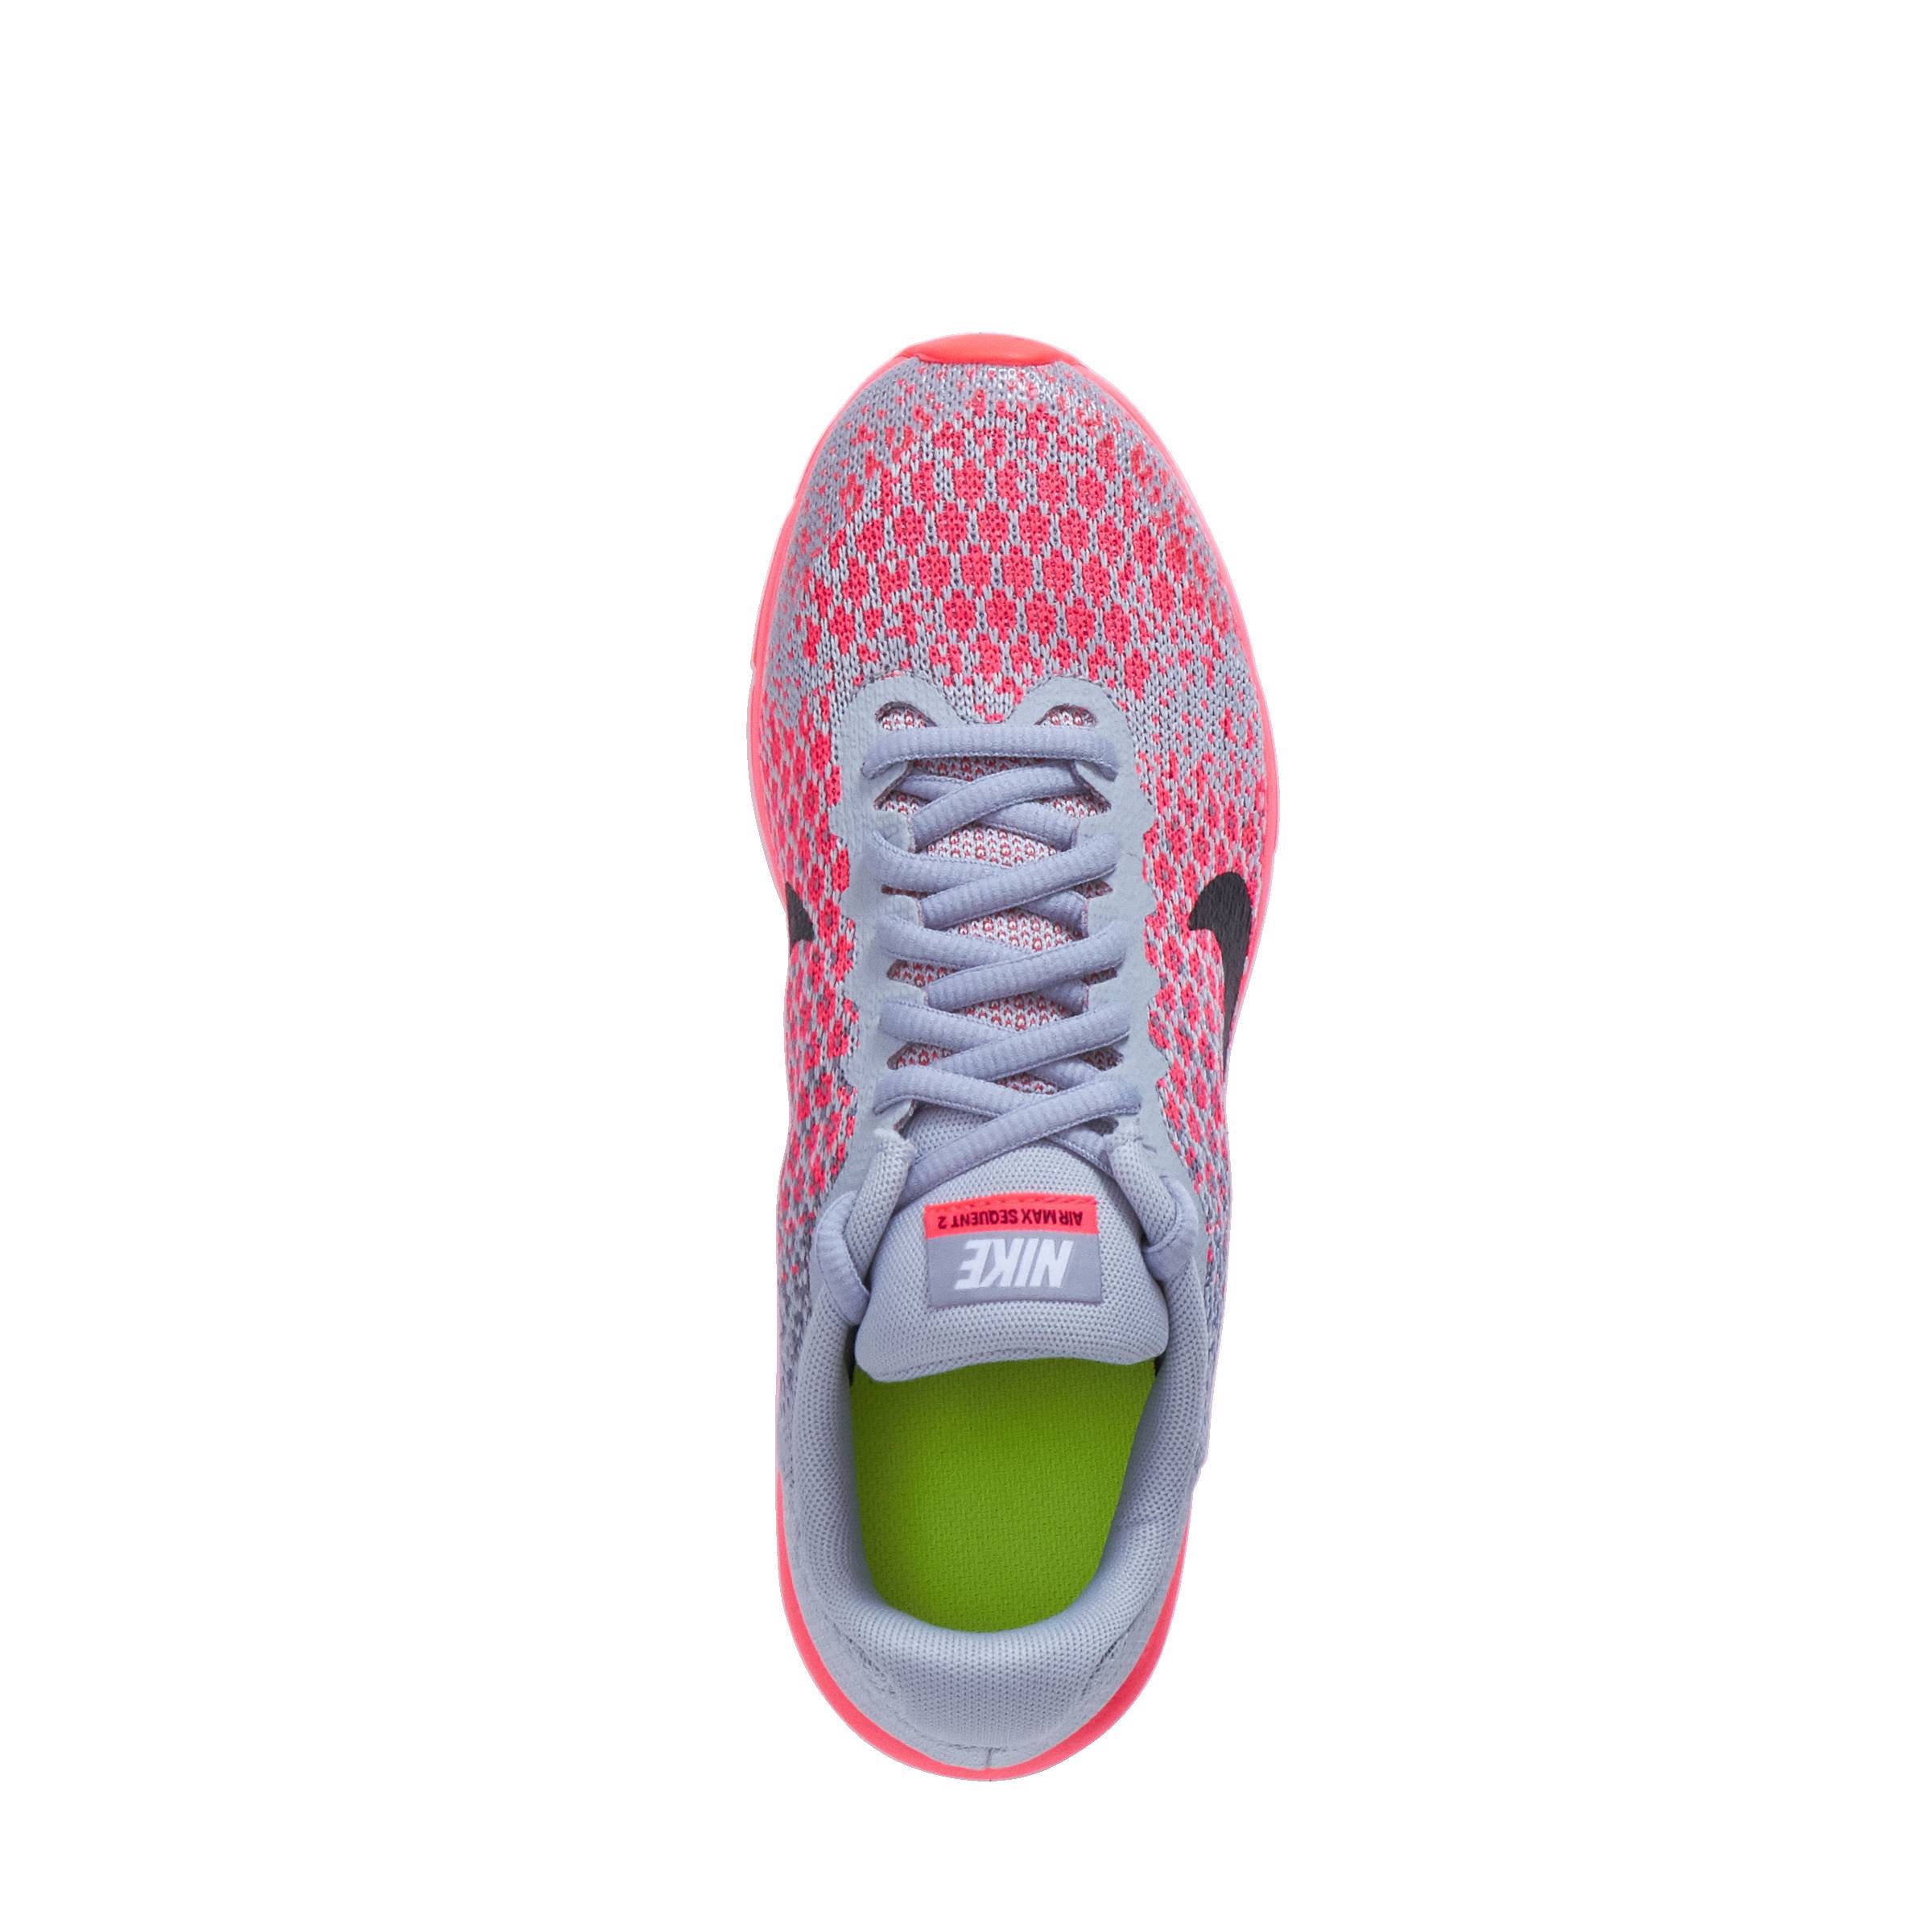 nike air max sequent grijs roze